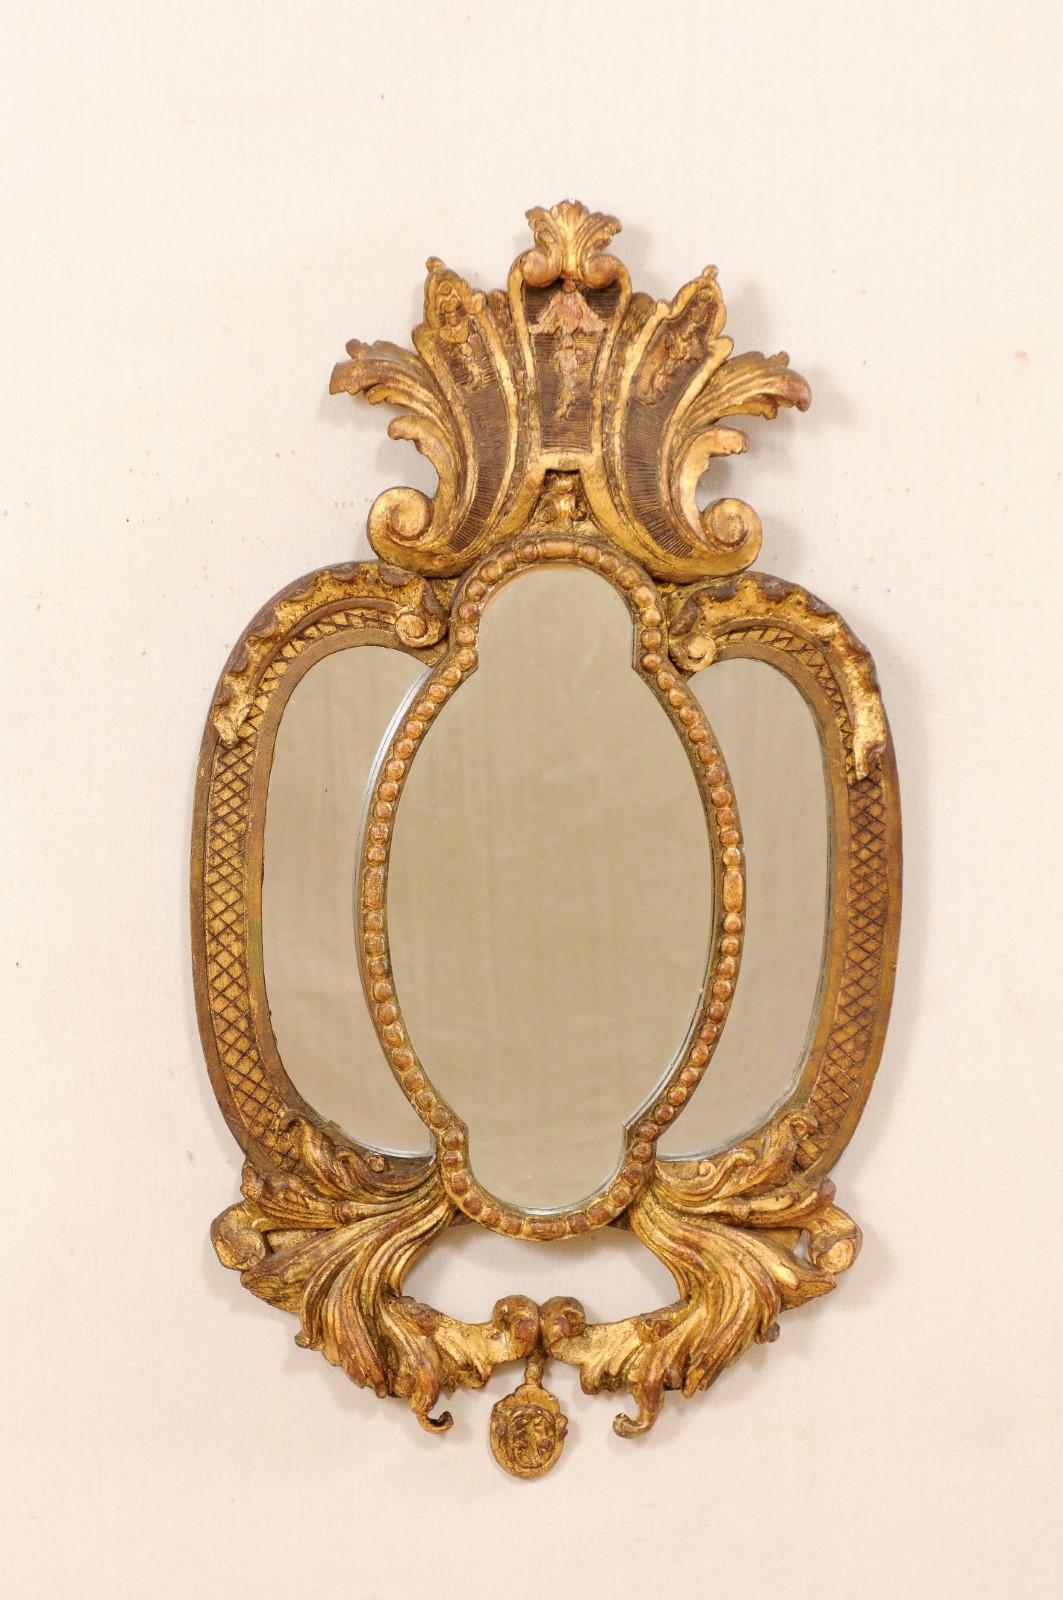 An Italian gilt and carved wood mirror from the early to mid-20th century. This gold-tone mirror from Italy features a beautifully carved surround with an exaggerated crest and bottom in an acanthus leaf motif. The mirror is divided into three